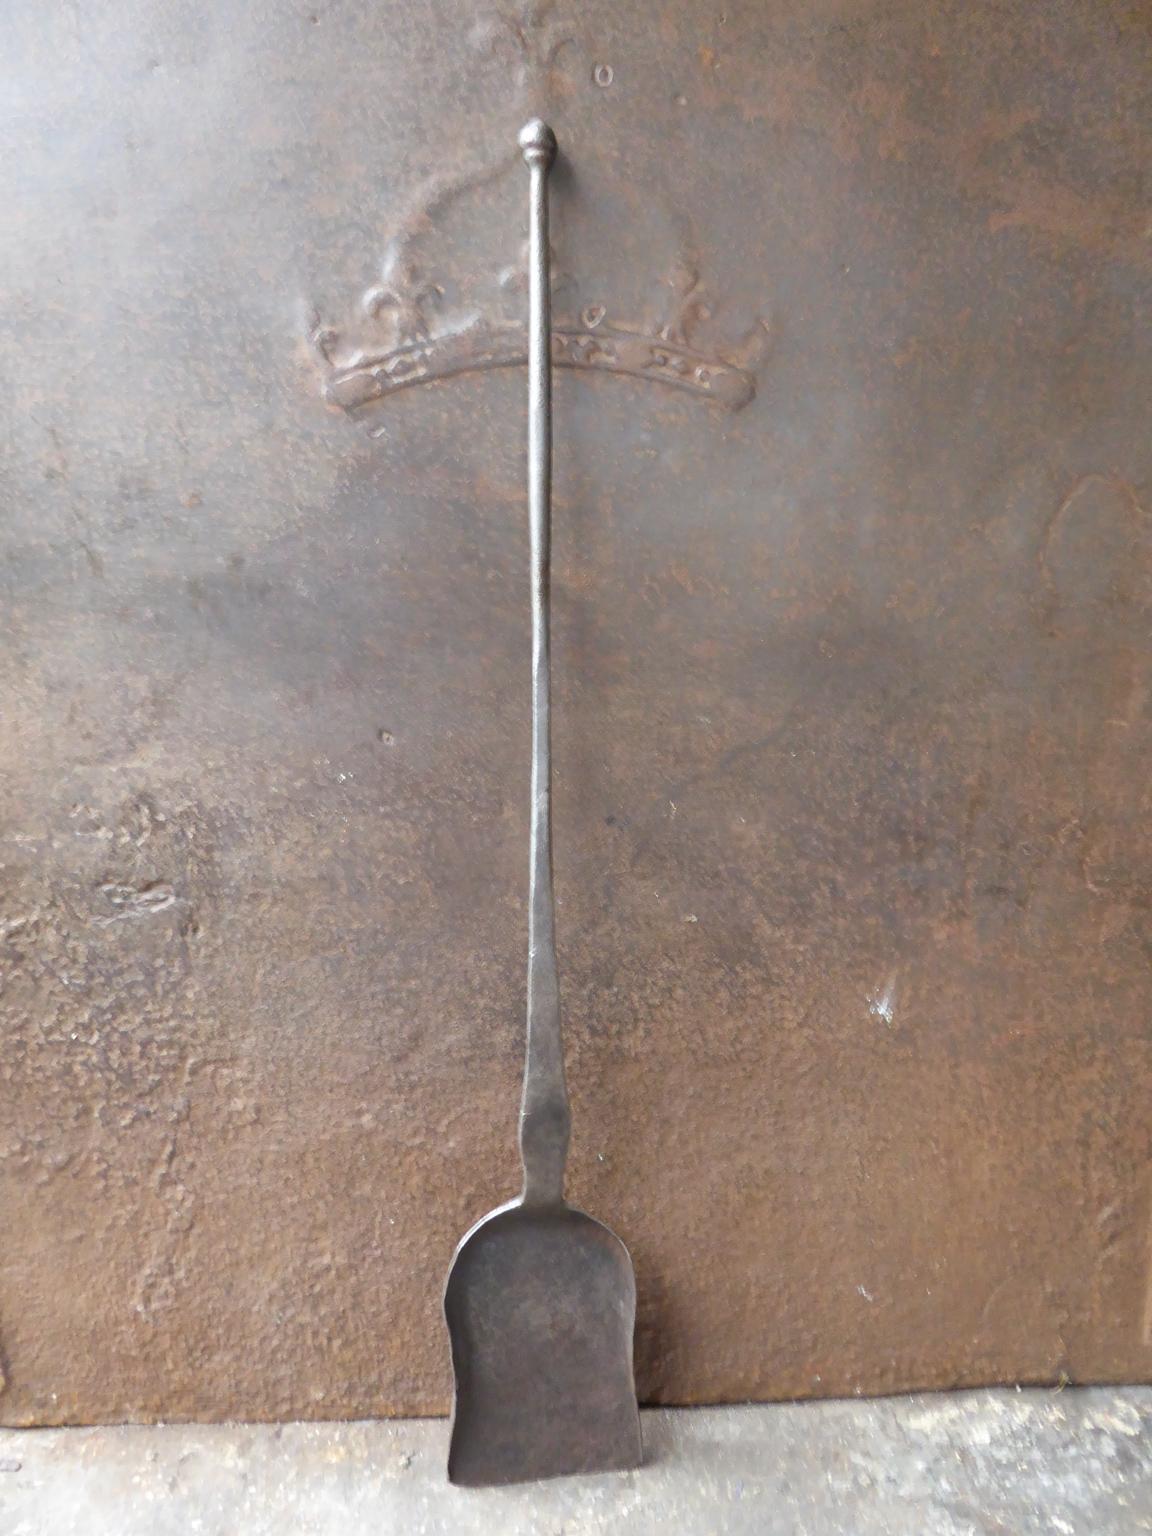 17th century French Louis XIV fireplace shovel made of wrought iron. The shovel is in a good condition and is fully functional.